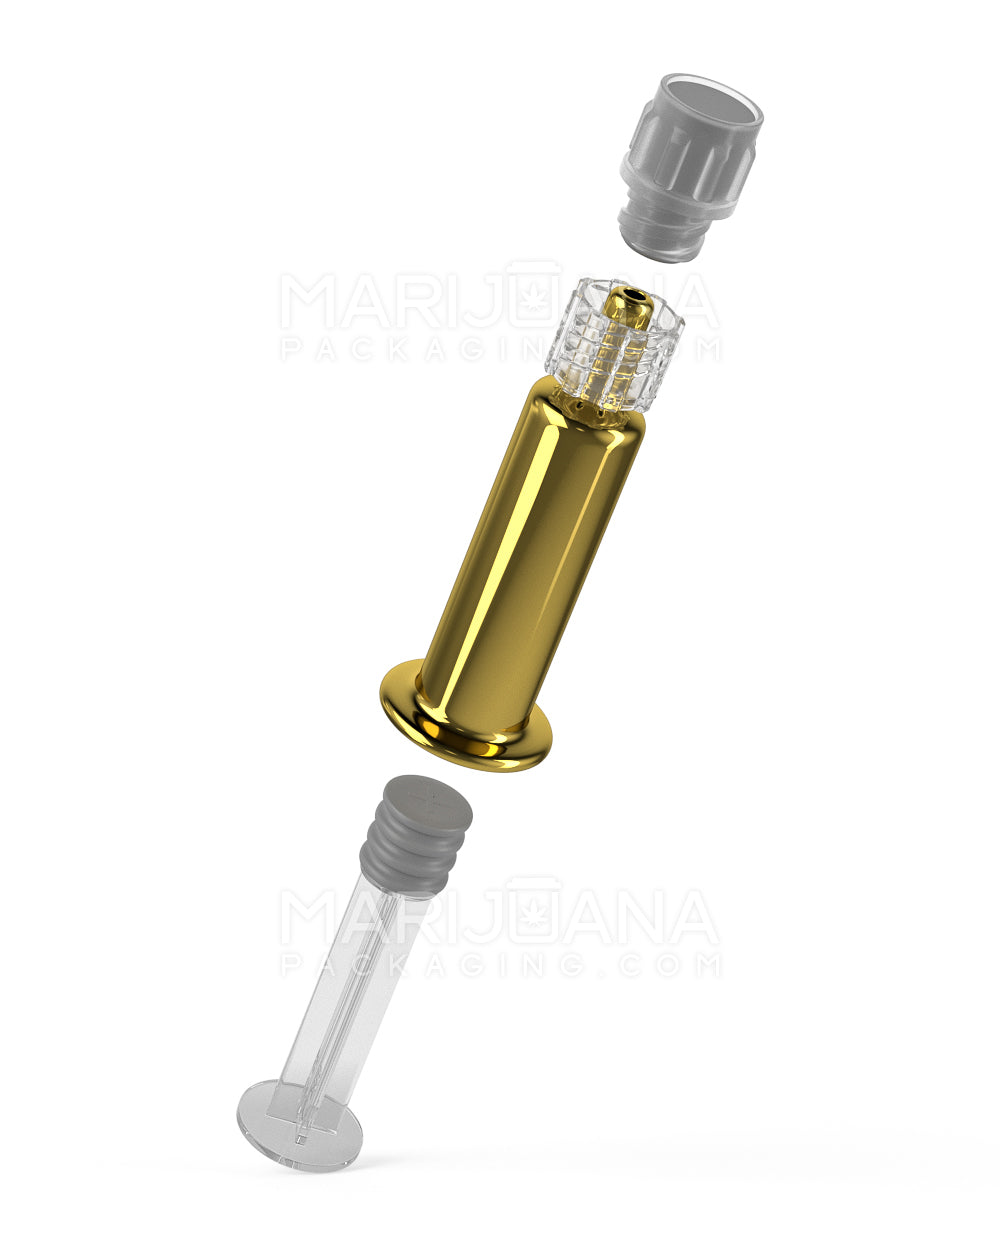 Luer Lock | Gold Glass Dab Applicator Syringes | 1mL - No Measurements - 100 Count - 6